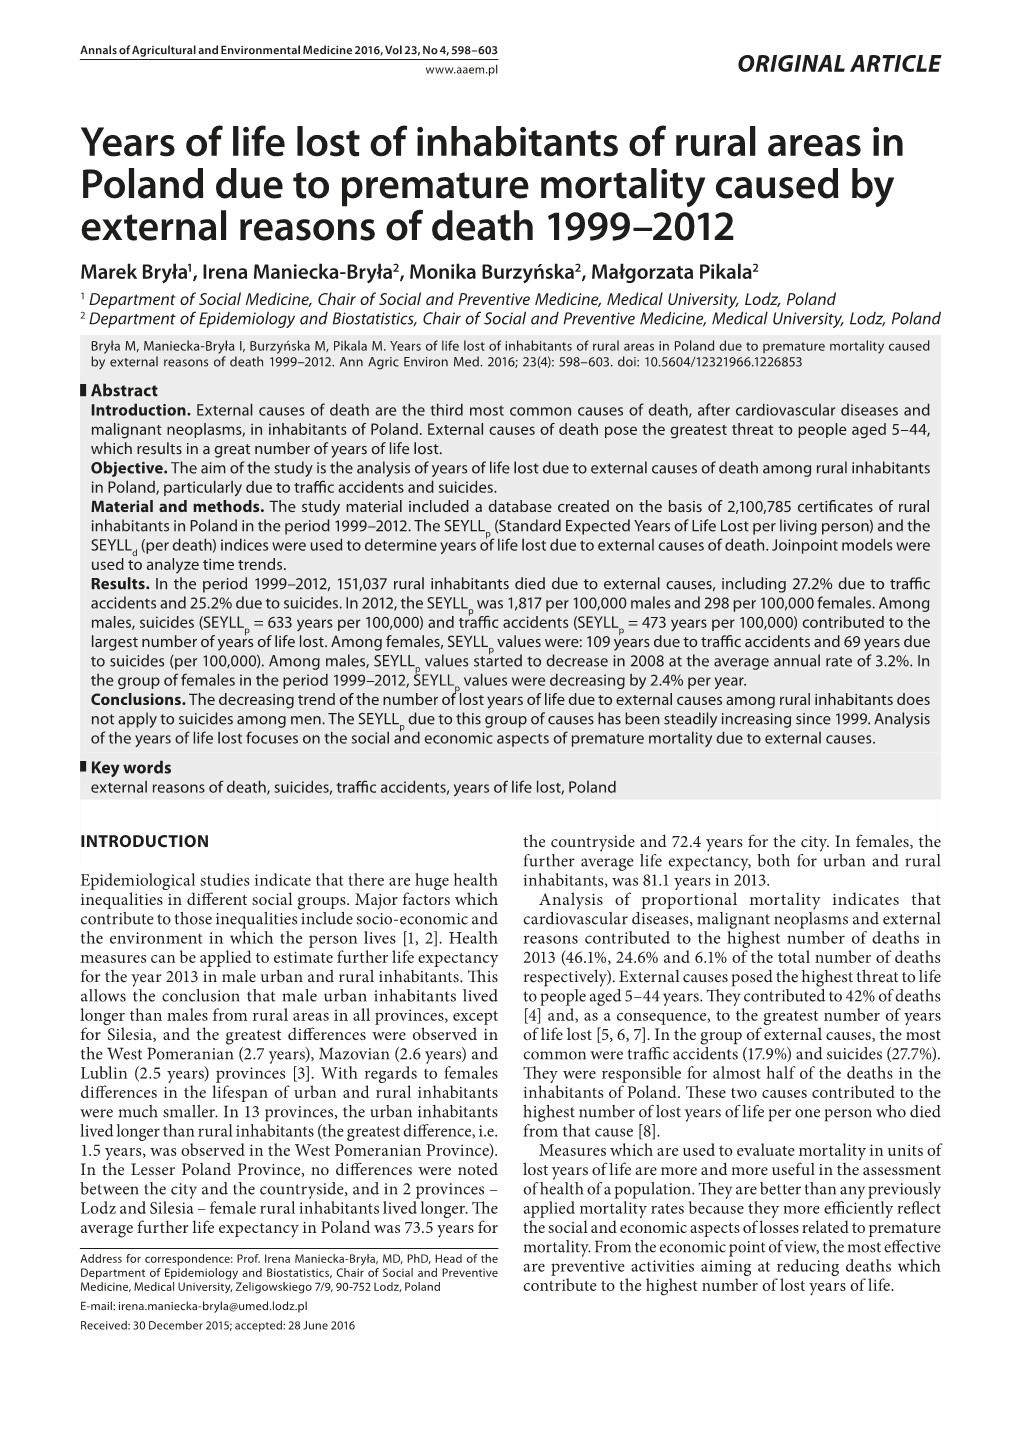 Years of Life Lost of Inhabitants of Rural Areas in Poland Due to Premature Mortality Caused by External Reasons of Death 1999–2012